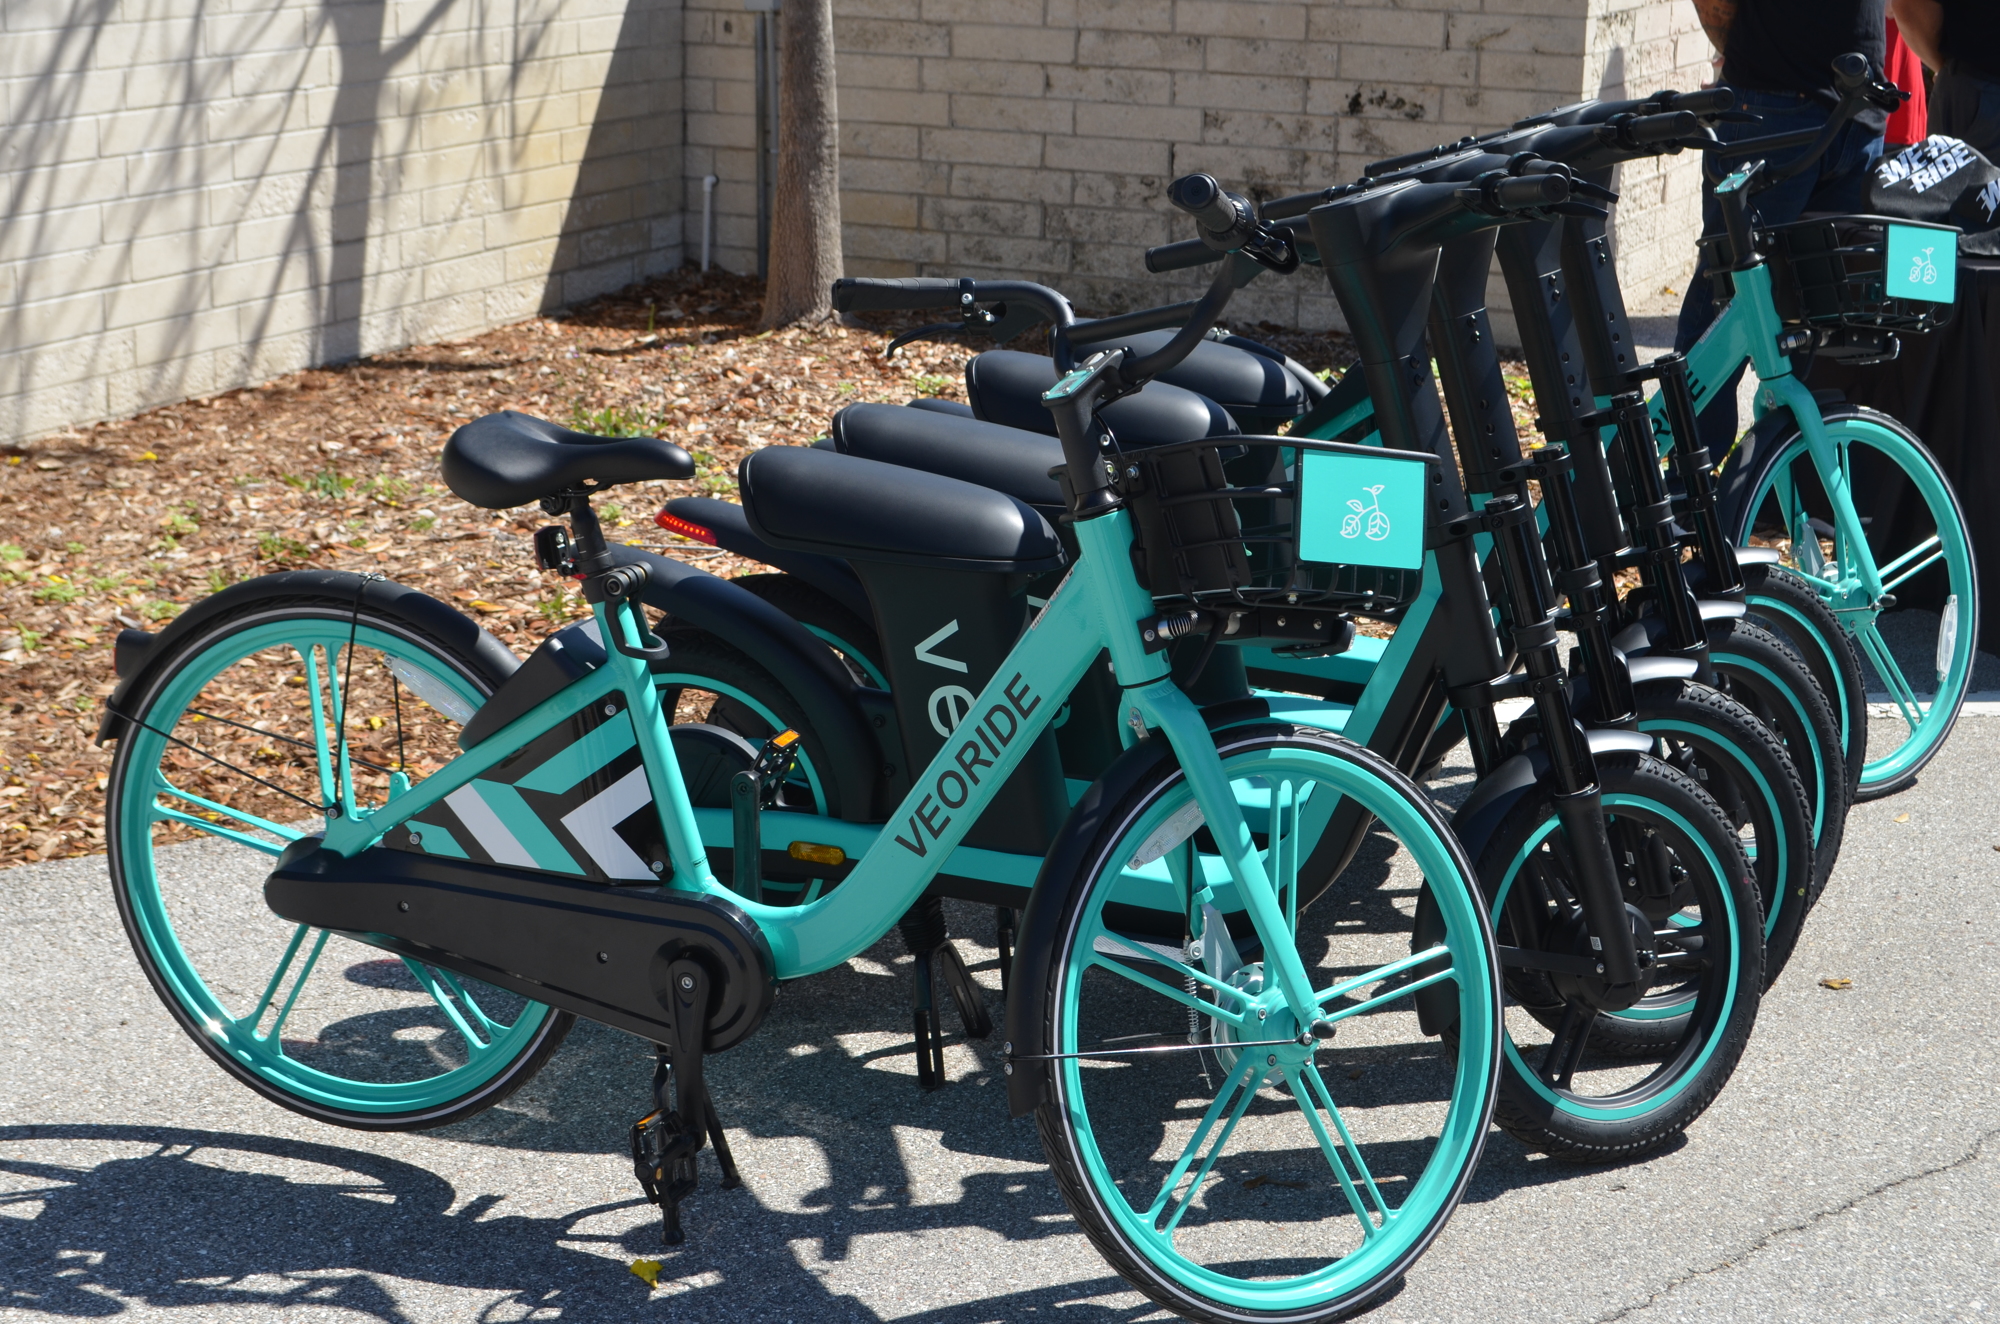 Sarasota's  e-scooter and e-bike program operated buy Veo has surpassed the company's expectations with more than 37,000 operations since it was launched less than four months ago. (File photo)